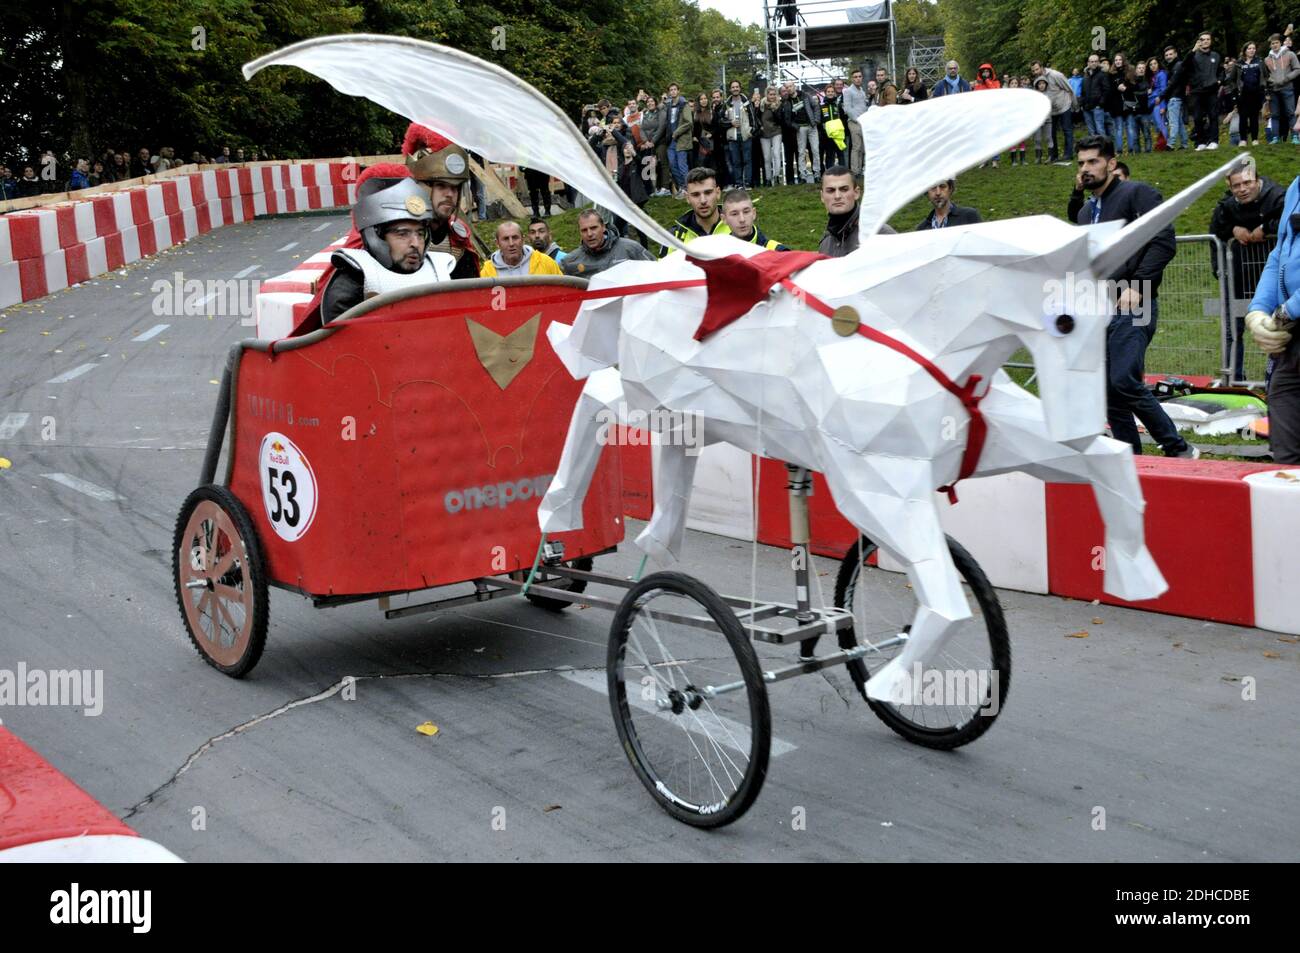 Red Bull Caisses a Savon in Paris, France on October 1, 2017. Around 50  cars are being driven in Parc de Saint Cloud. Photo by Alain  Apaydin/ABACAPRESS.COM Stock Photo - Alamy